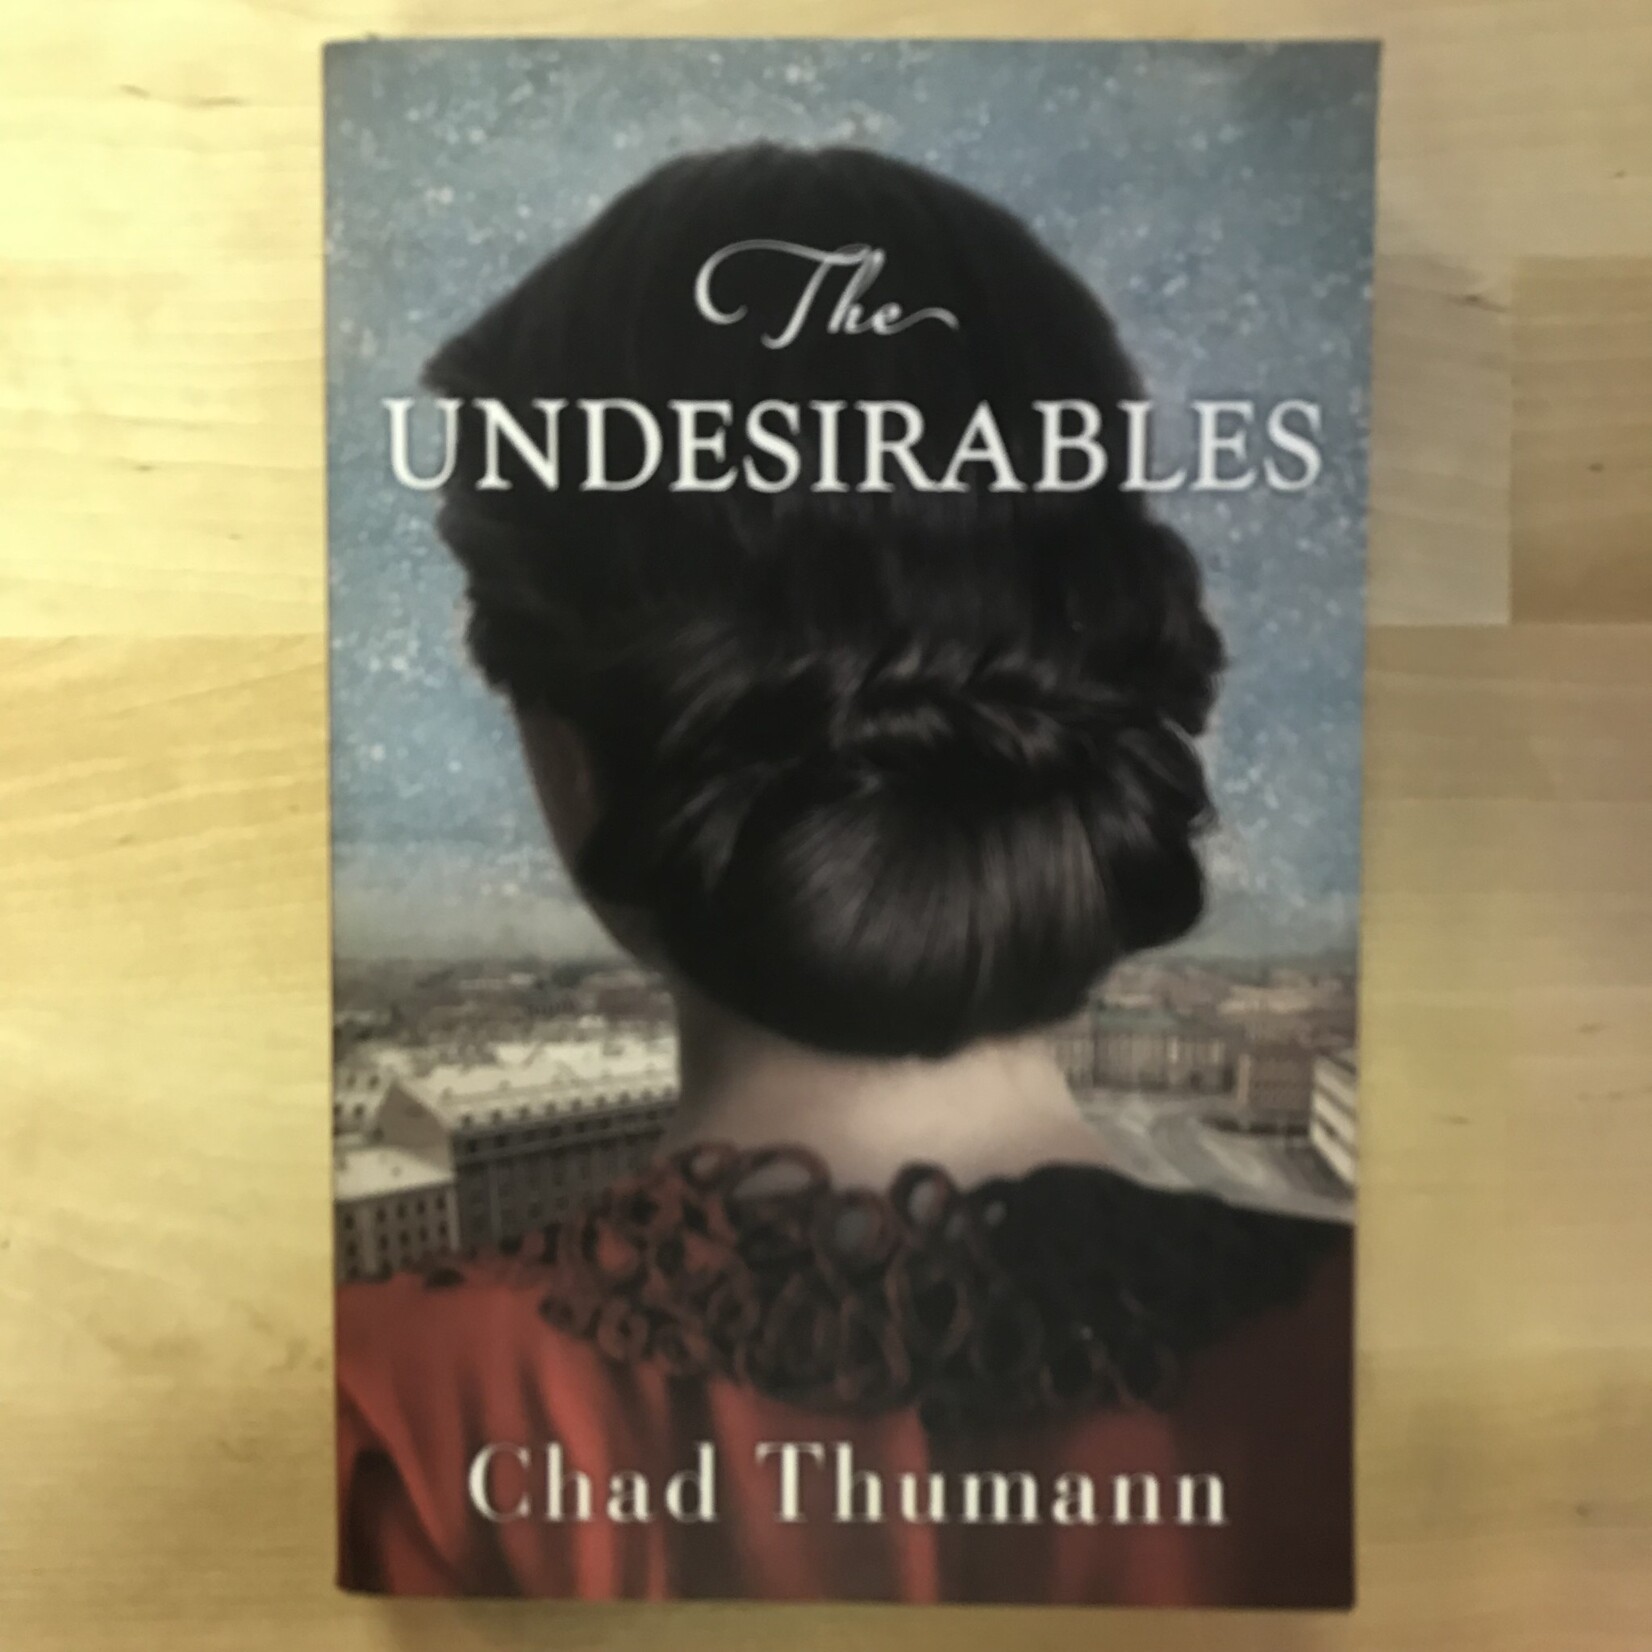 Chad Thumann - The Undesirables - Paperback (USED)